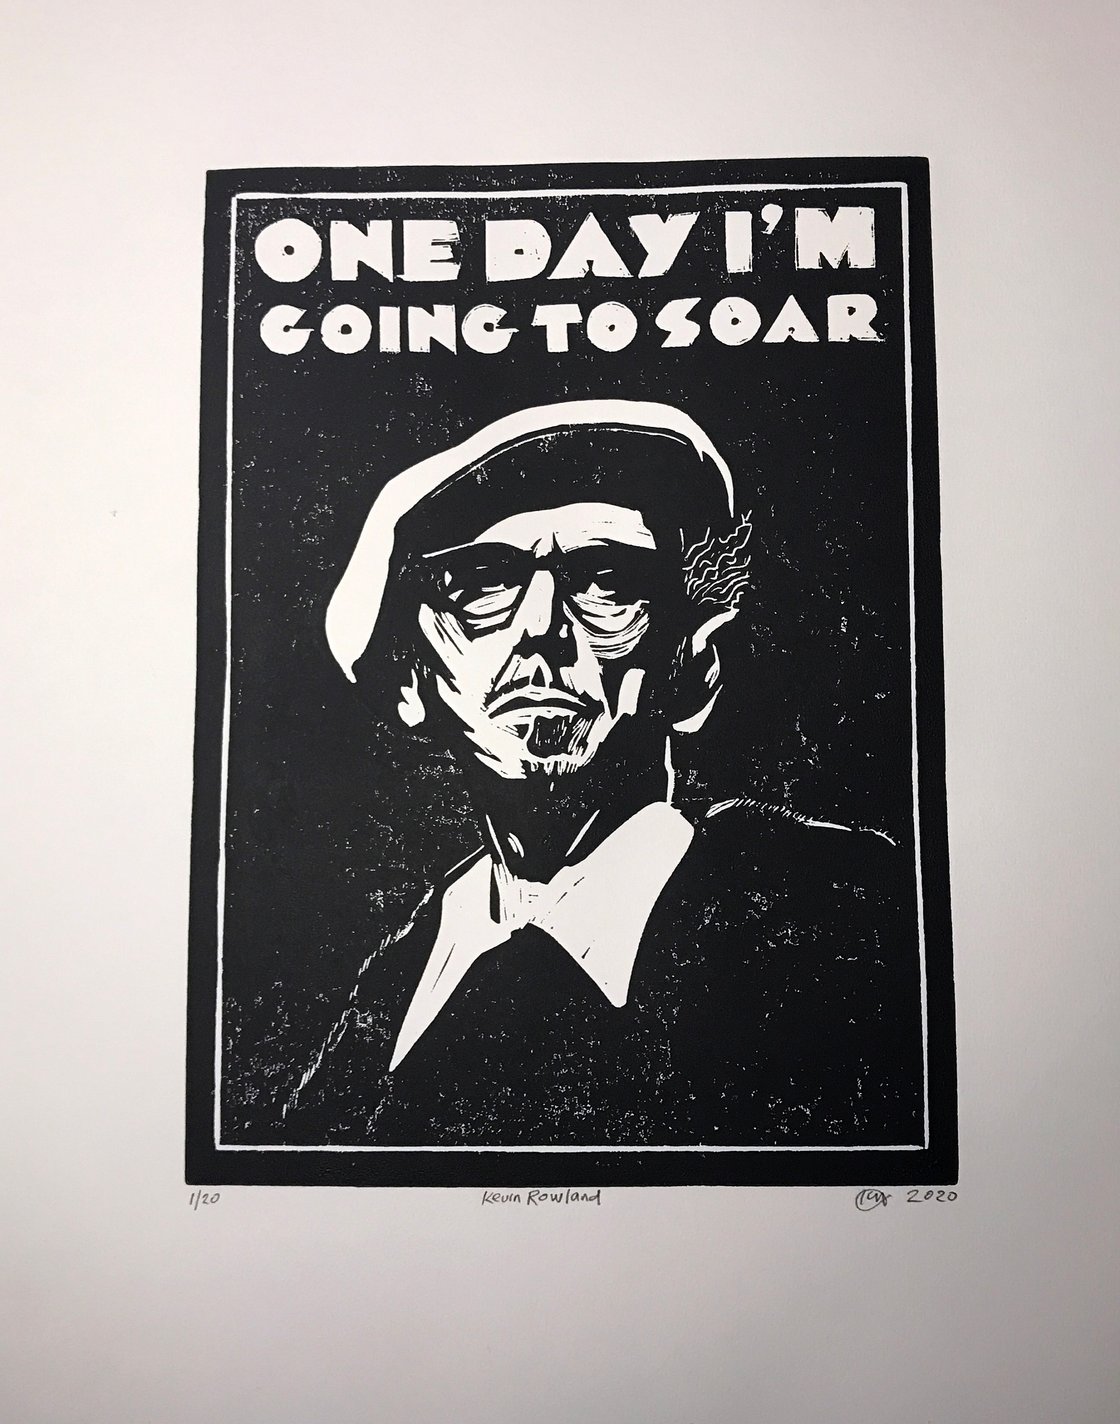 Image of Kevin Rowland. Dexys. Hand Made. Original A3. Linocut print. Limited and Signed. Art.